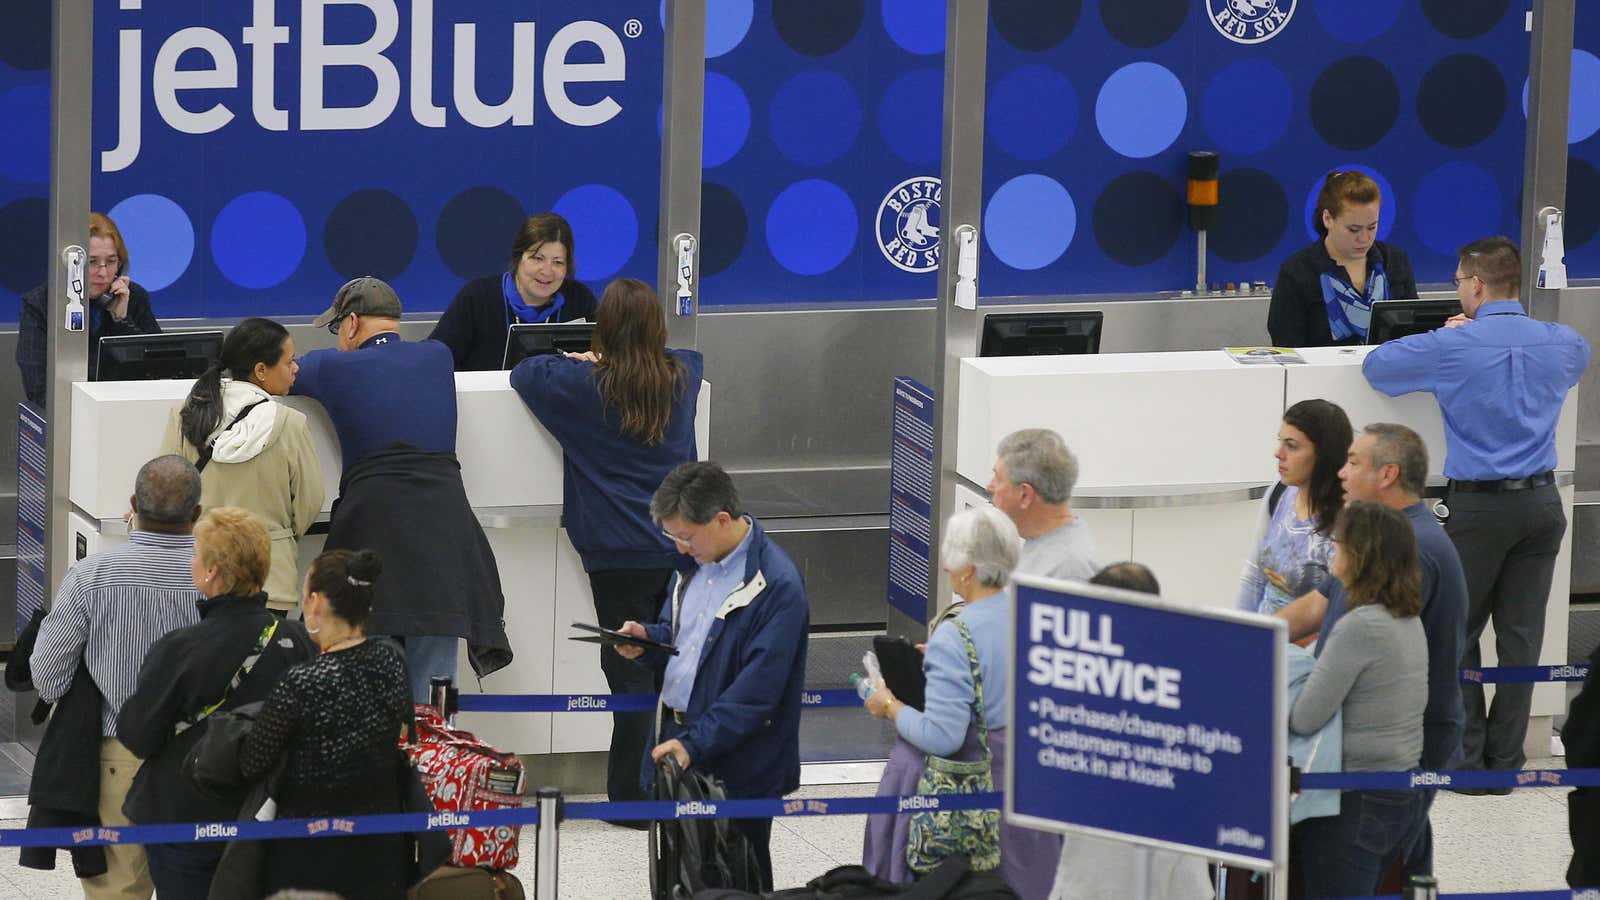 Passengers wait in line at the JetBlue ticket counter at Logan International Airport in Boston, Massachusetts January 6, 2014.